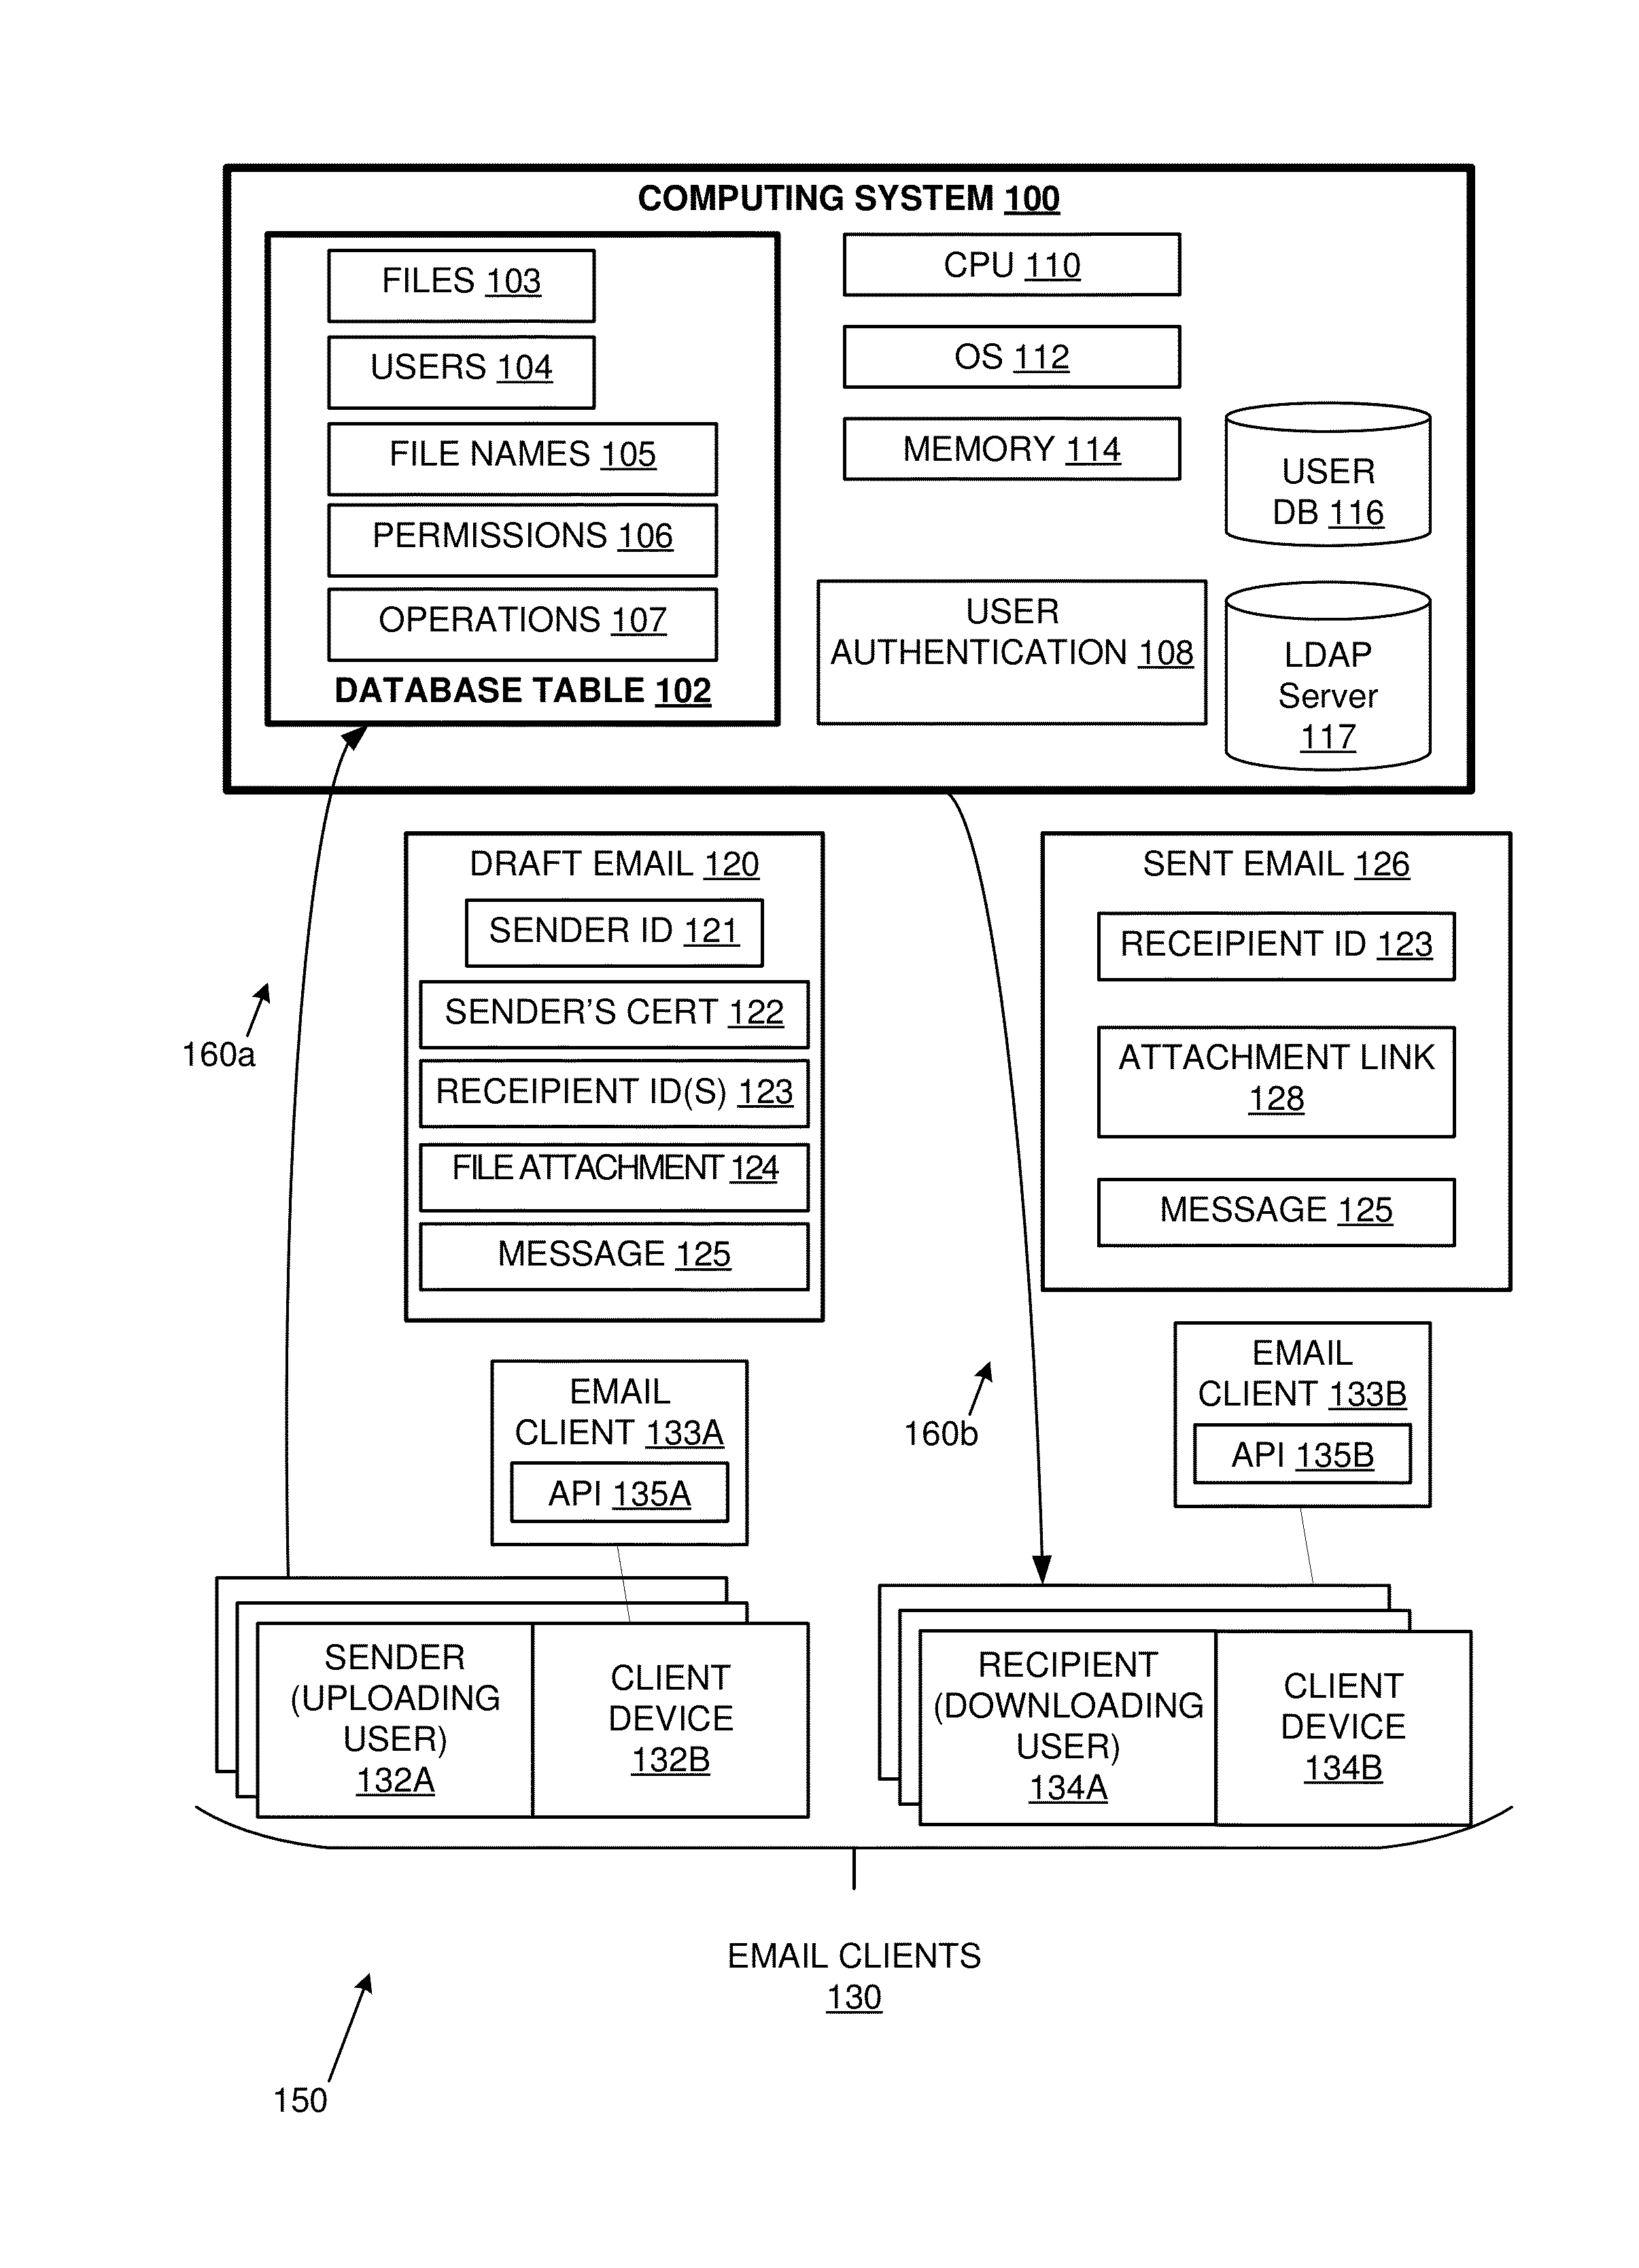 Authorizing access by email and sharing of attachments